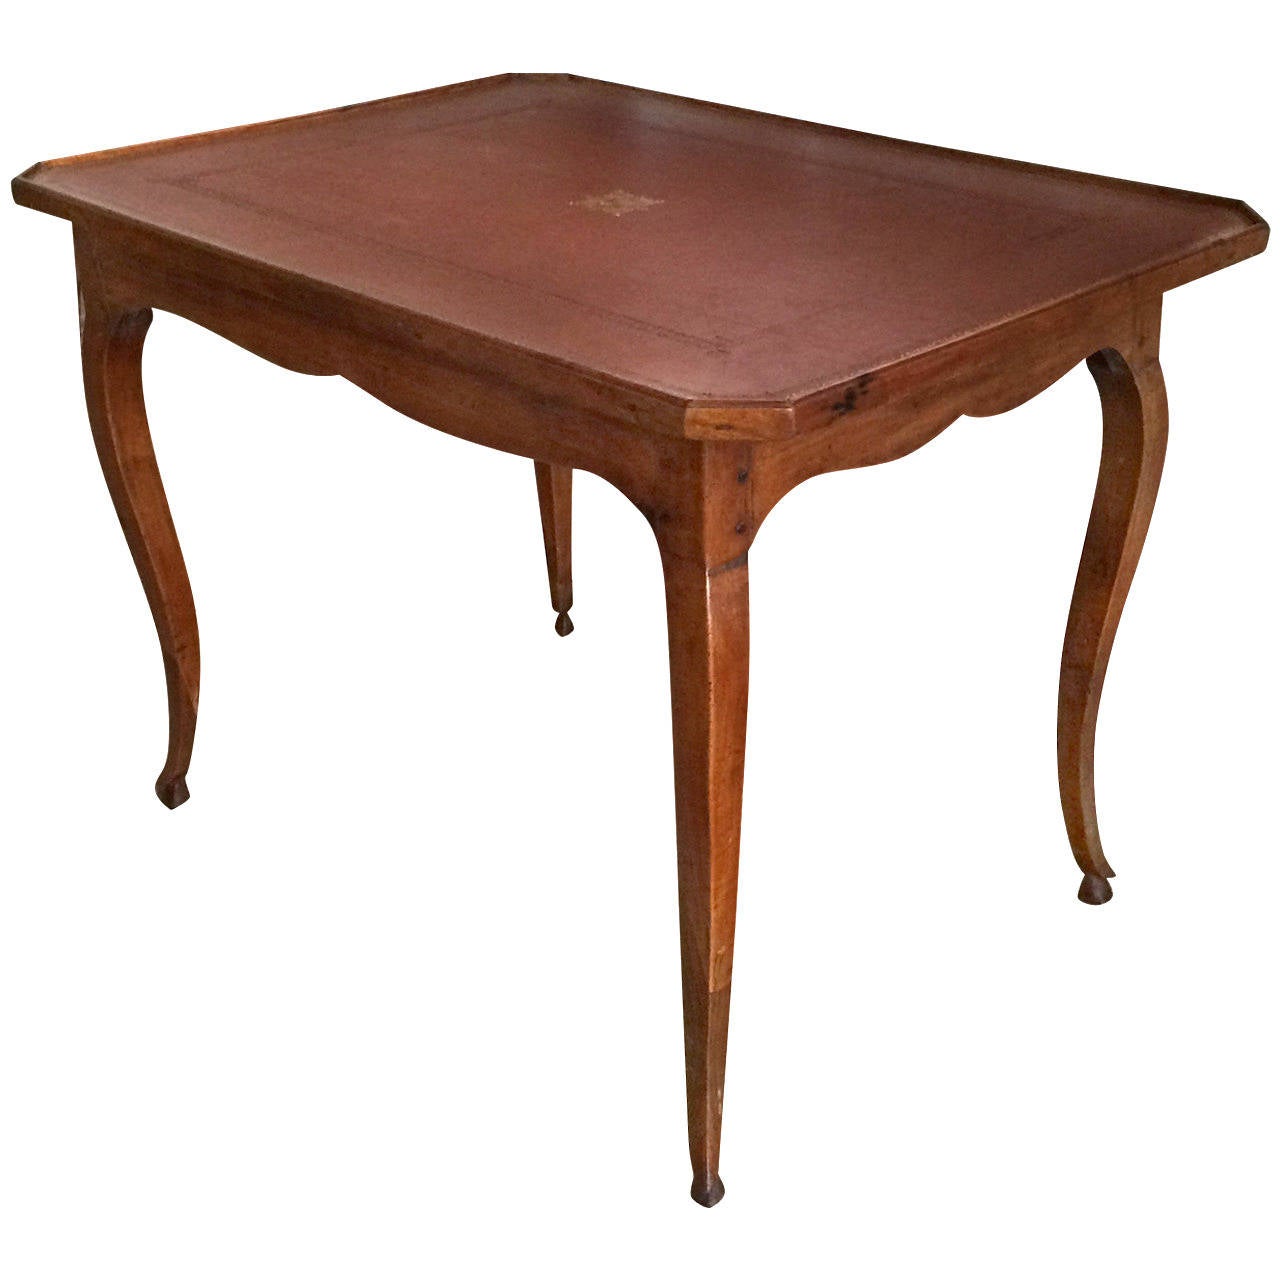 18th century Louis XIV style cherrywood writing table, stenciled leather inset with a centre medallion.